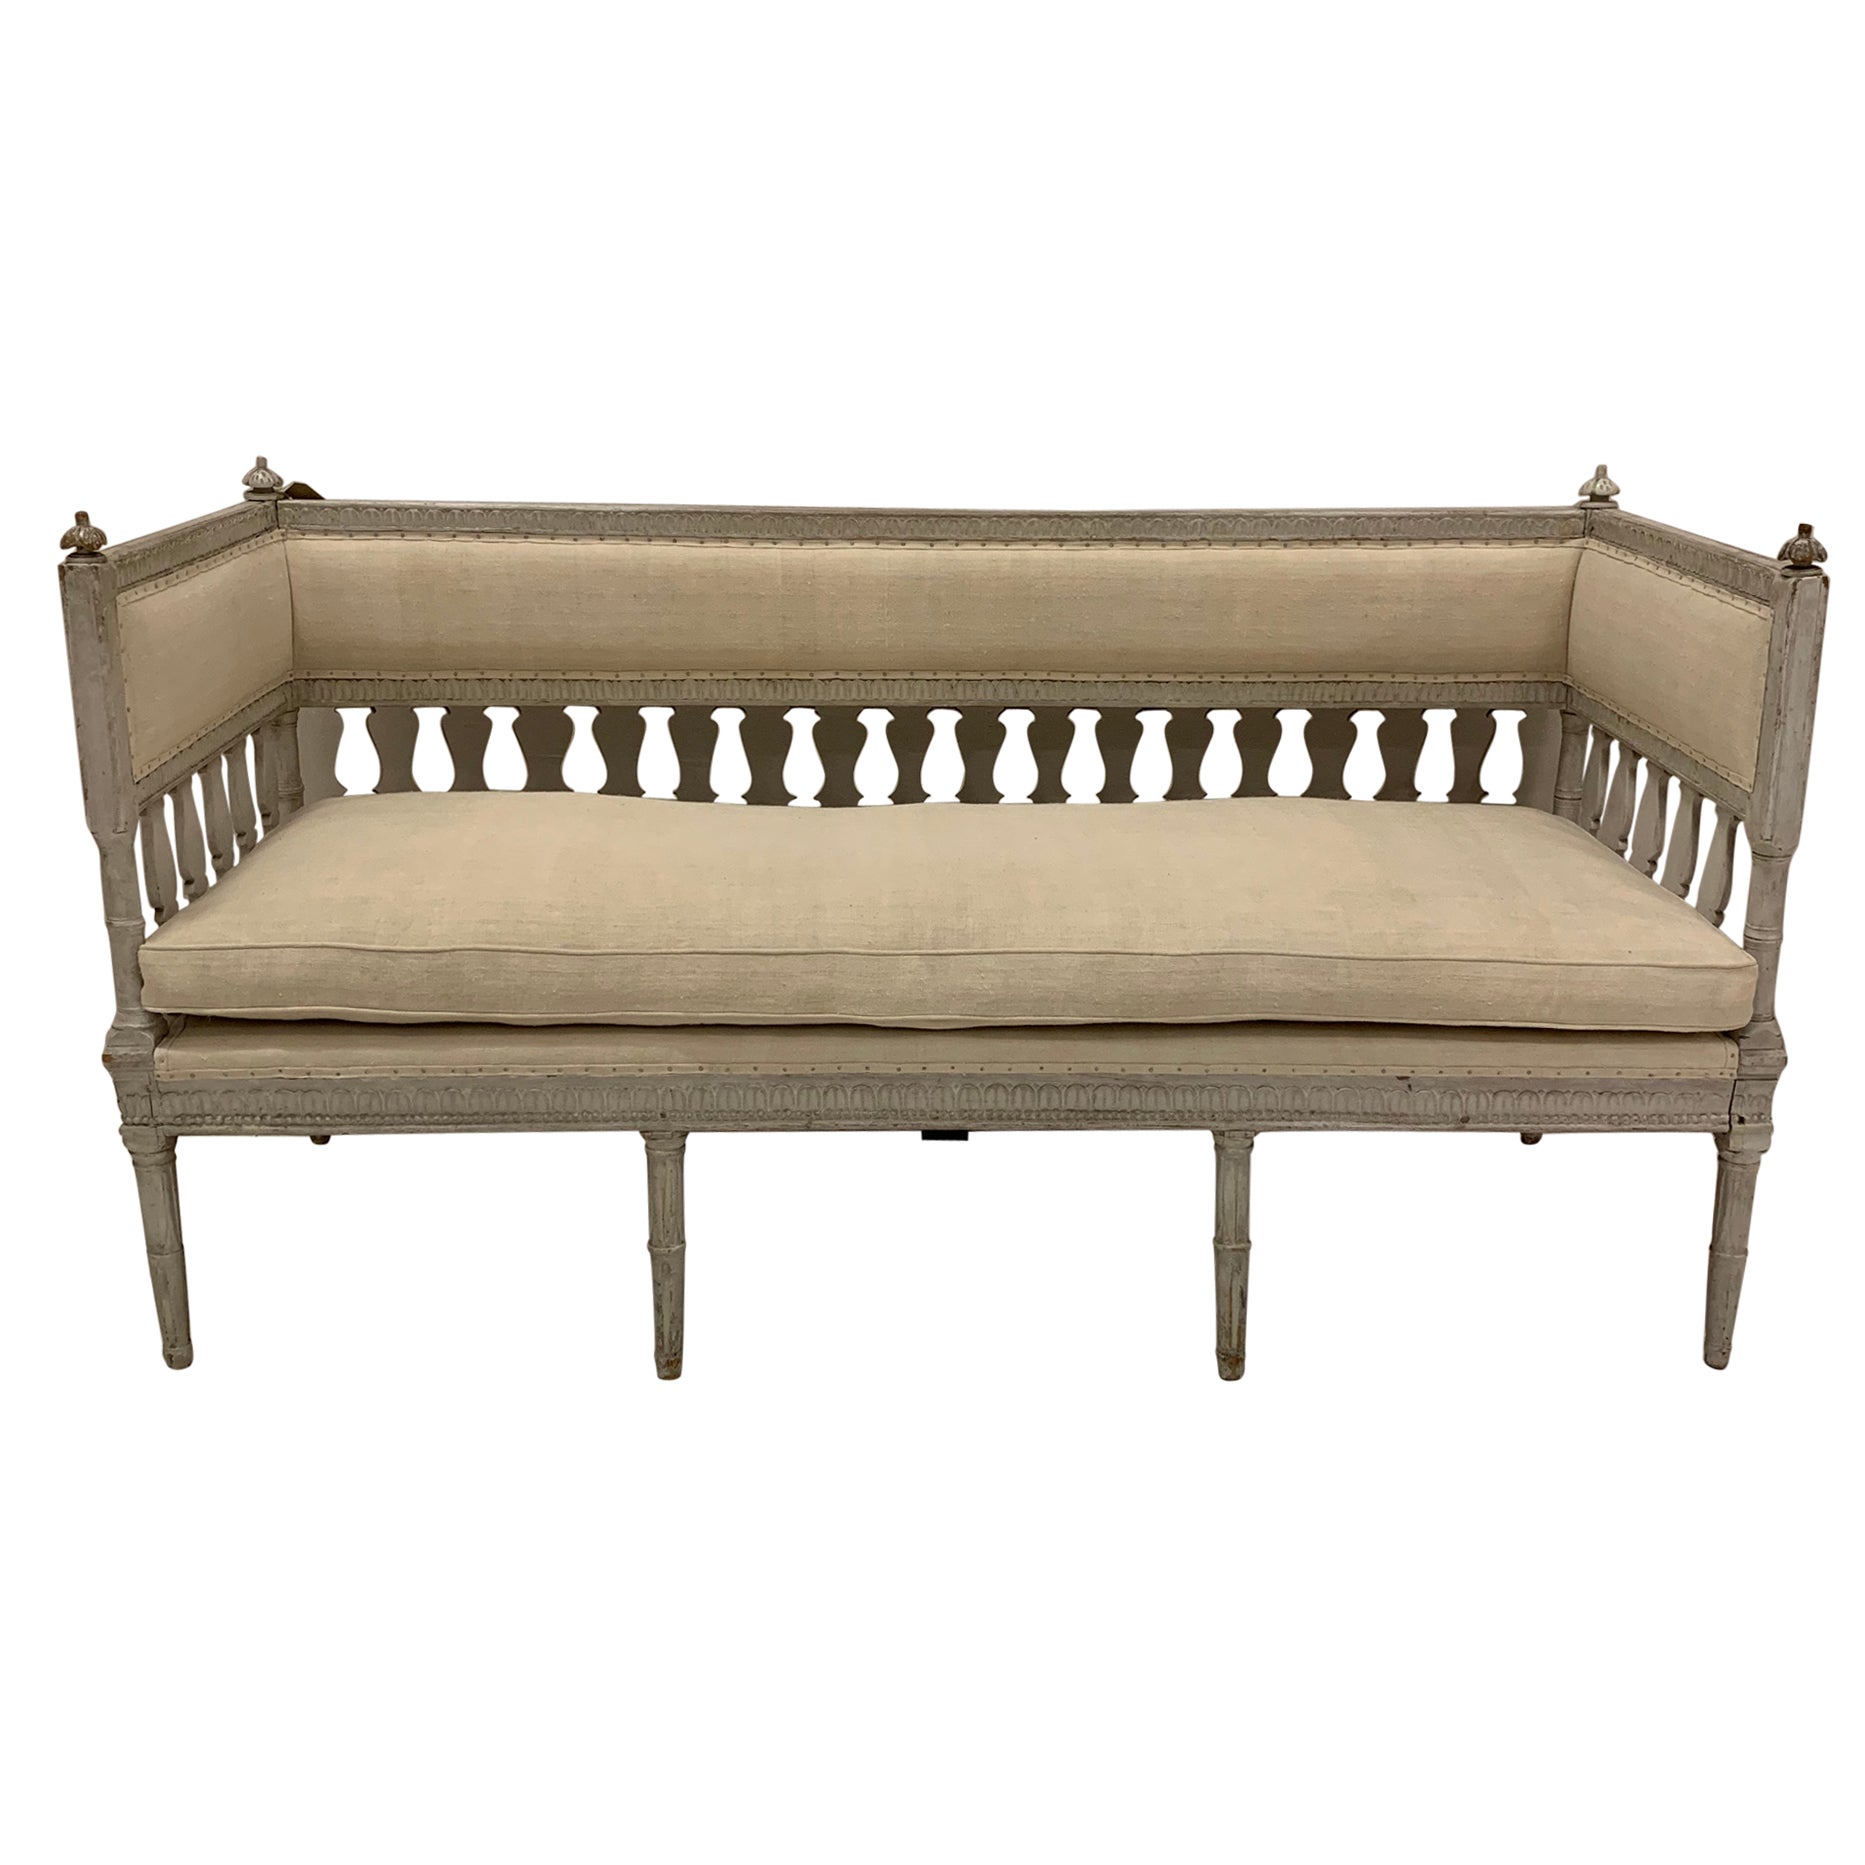 19th Century Swedish Painted Sofa with Decorative Detail in the Gustavian Style